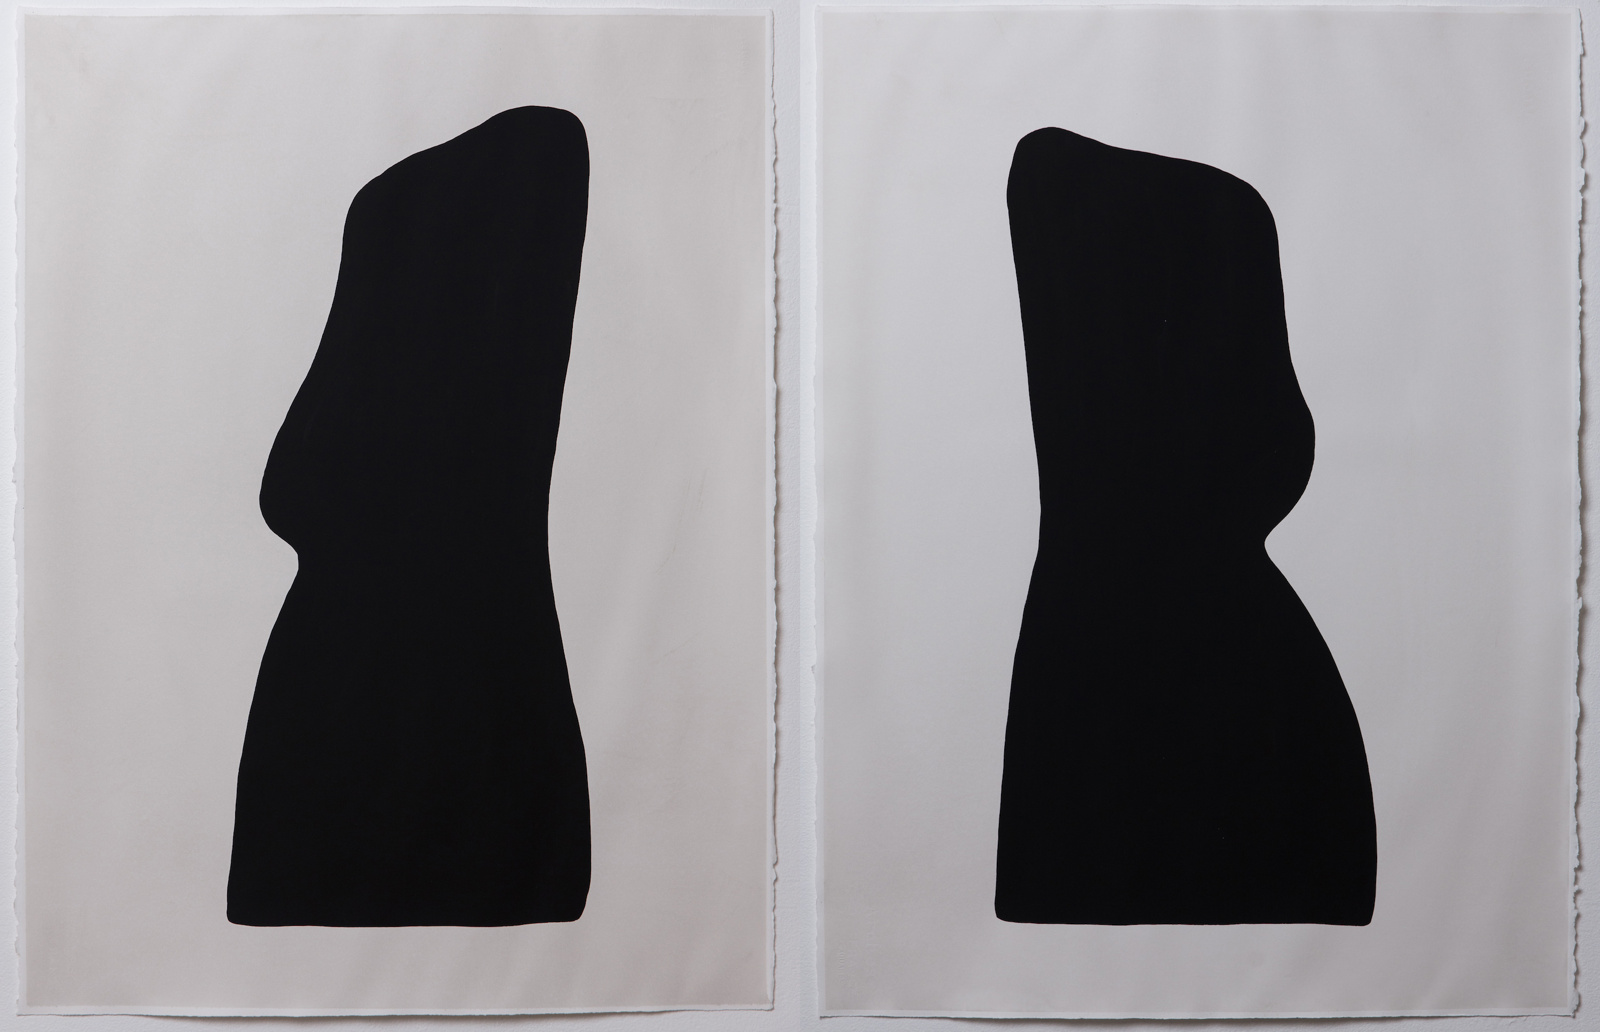   Side I and Side II   ink and gouache on paper  30.25 x 22.5 in (each)  Private Collection 